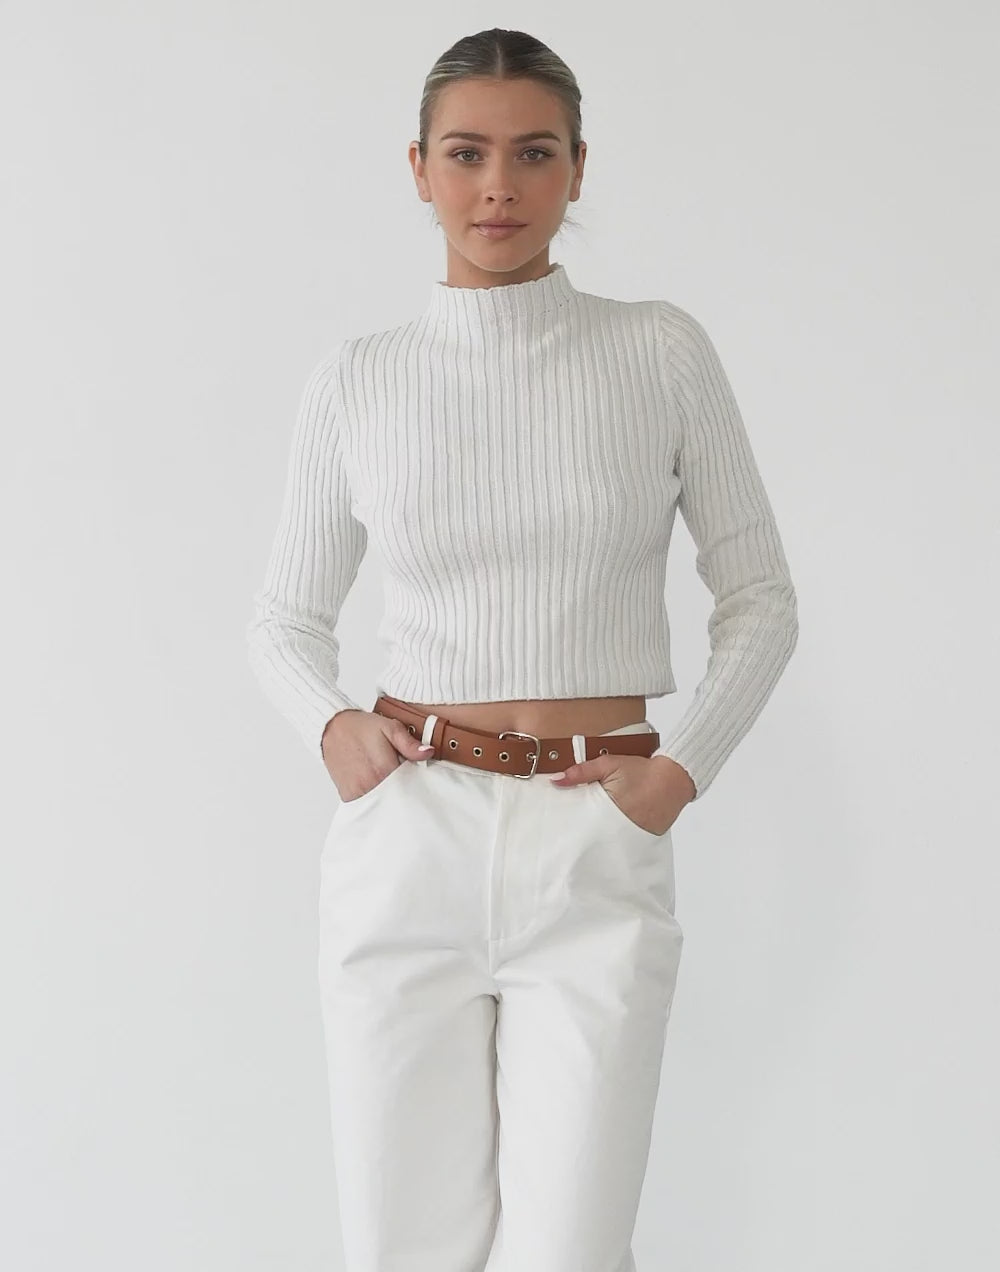 Dionne Long Sleeve Top (White)